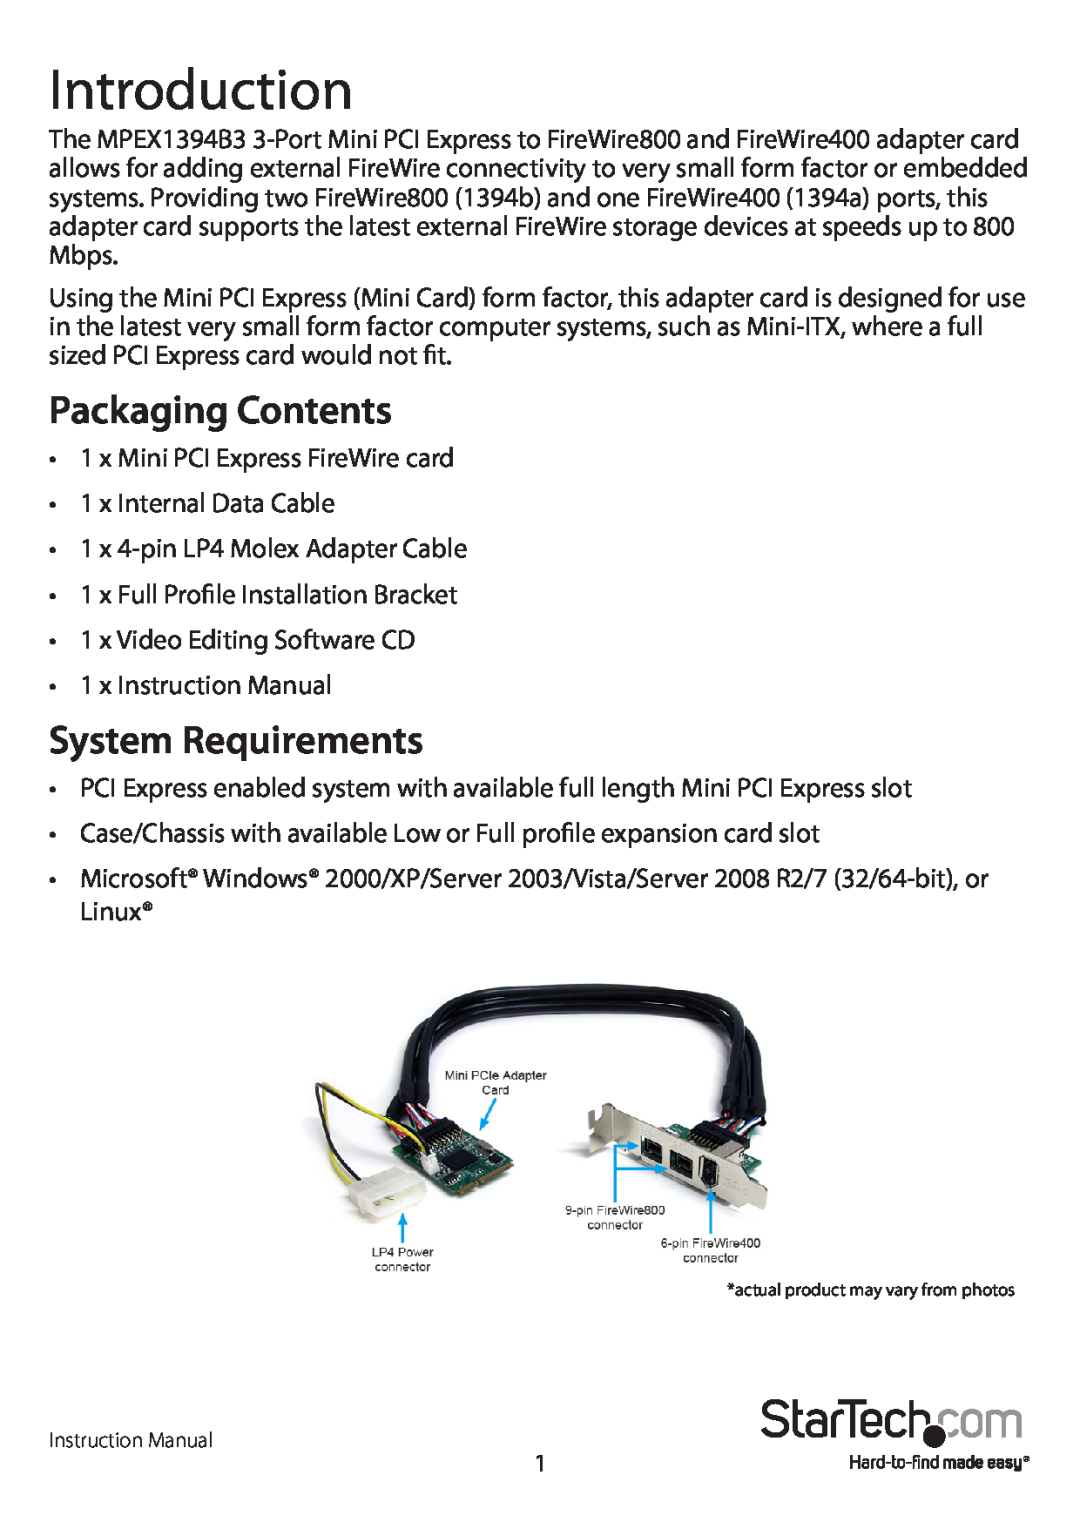 StarTech.com 1394 manual Introduction, Packaging Contents, System Requirements 